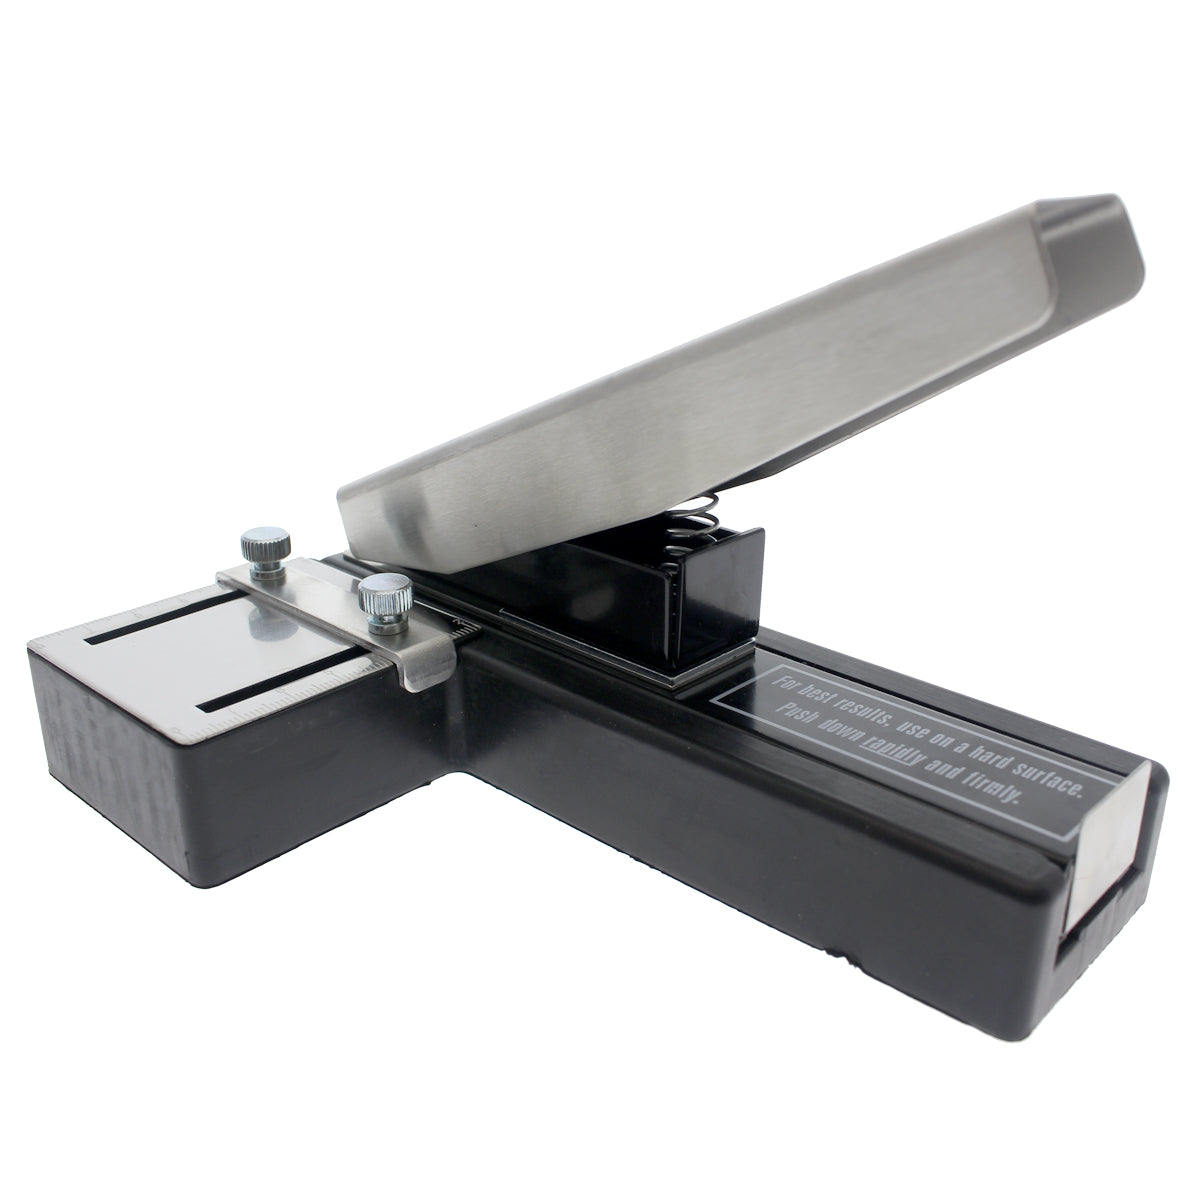 Heavy Duty Stapler Style ID Badge Slot Hole Punch (Rectangle) - with Adjustable Guides and Non-Skid Base for PVC & Plastic and Laminated Paper Cards